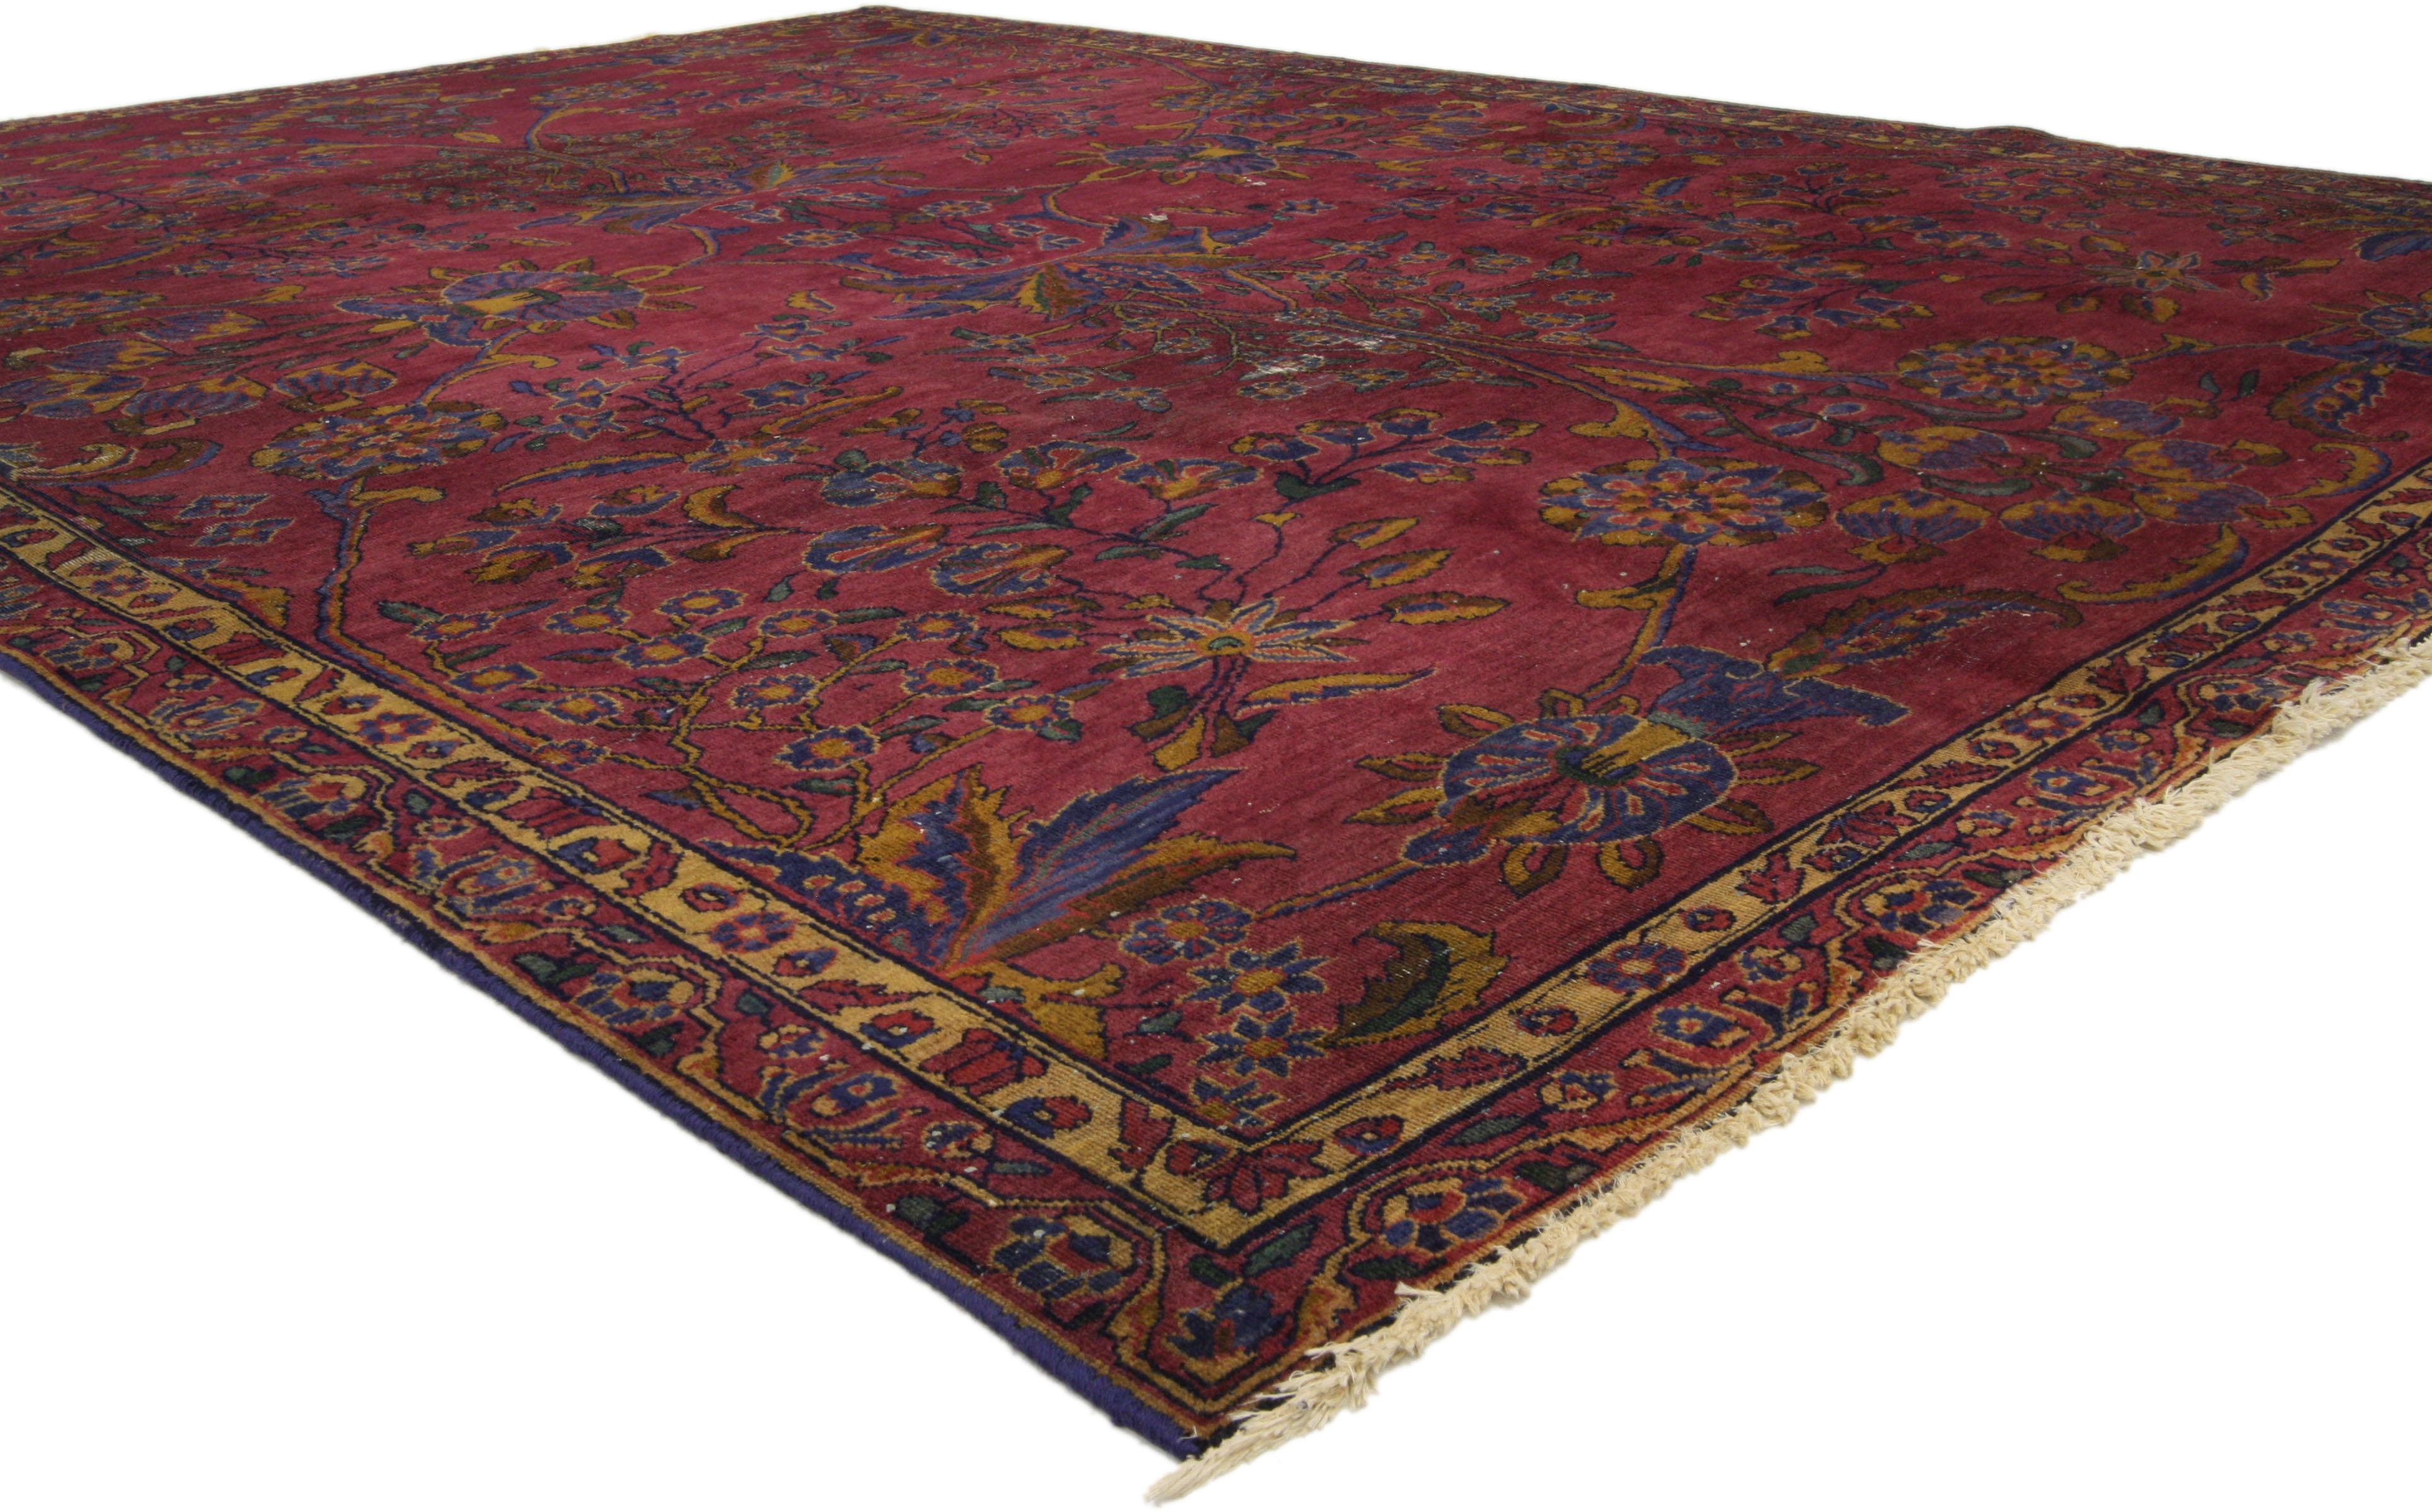 71879 Distressed Burgundy Antique Indian Area Rug with Old World Venetian Style 06'09 x 09'04. Rich in color, texture and beguiling ambiance, this distressed burgundy antique Indian rug features a lavish floral pattern composed of millefleur sprays,